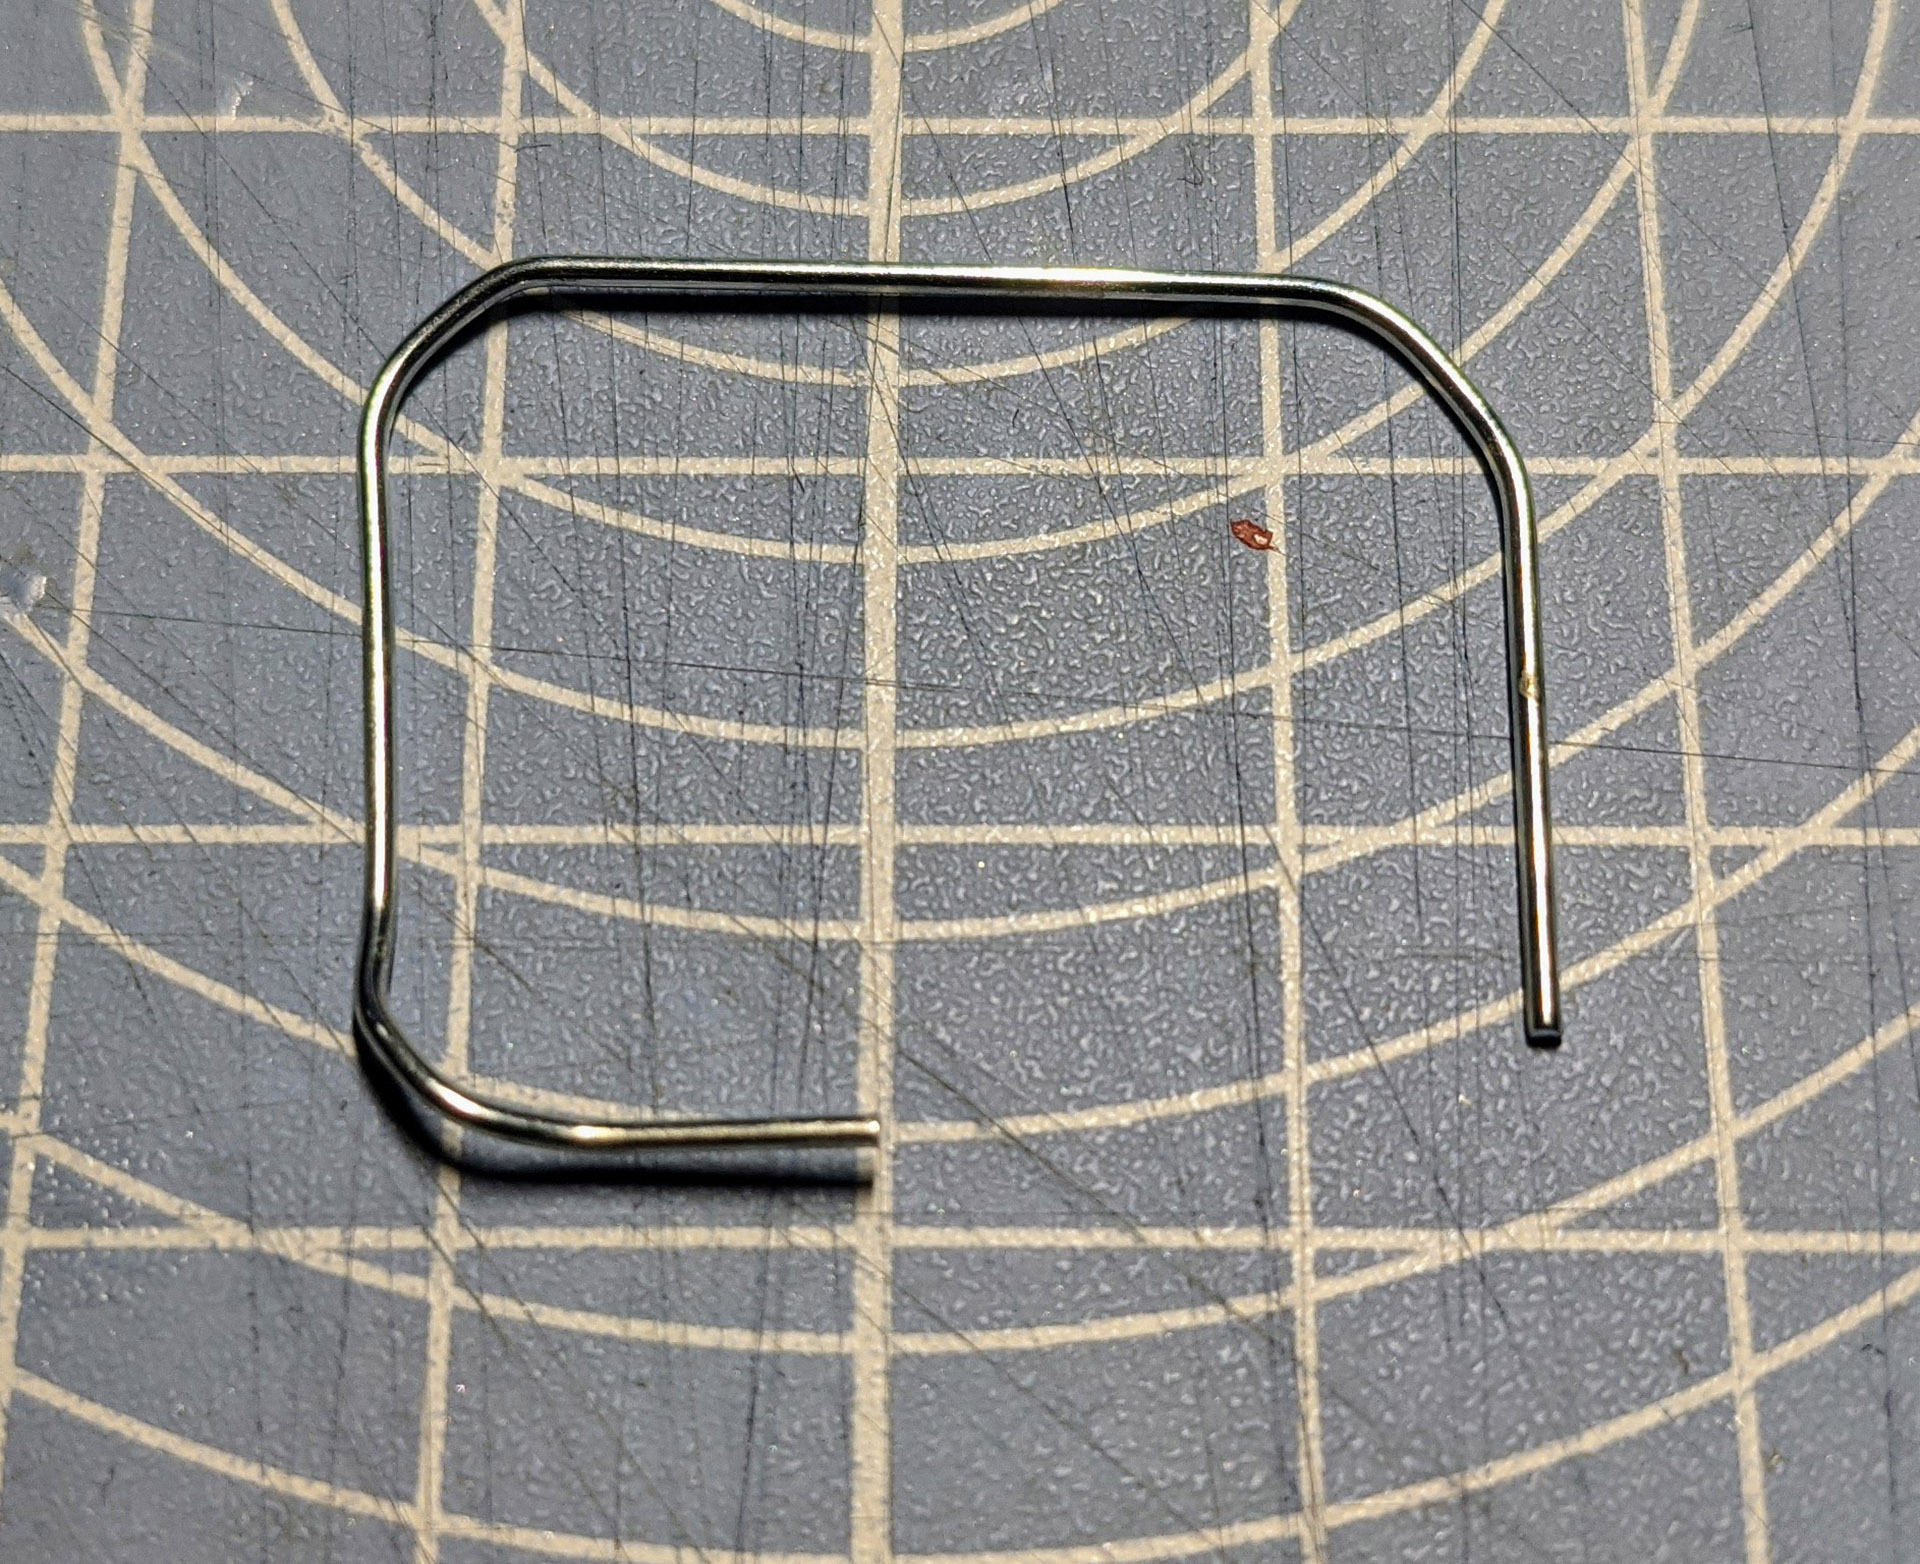 Fold open the paperclip to form a square.